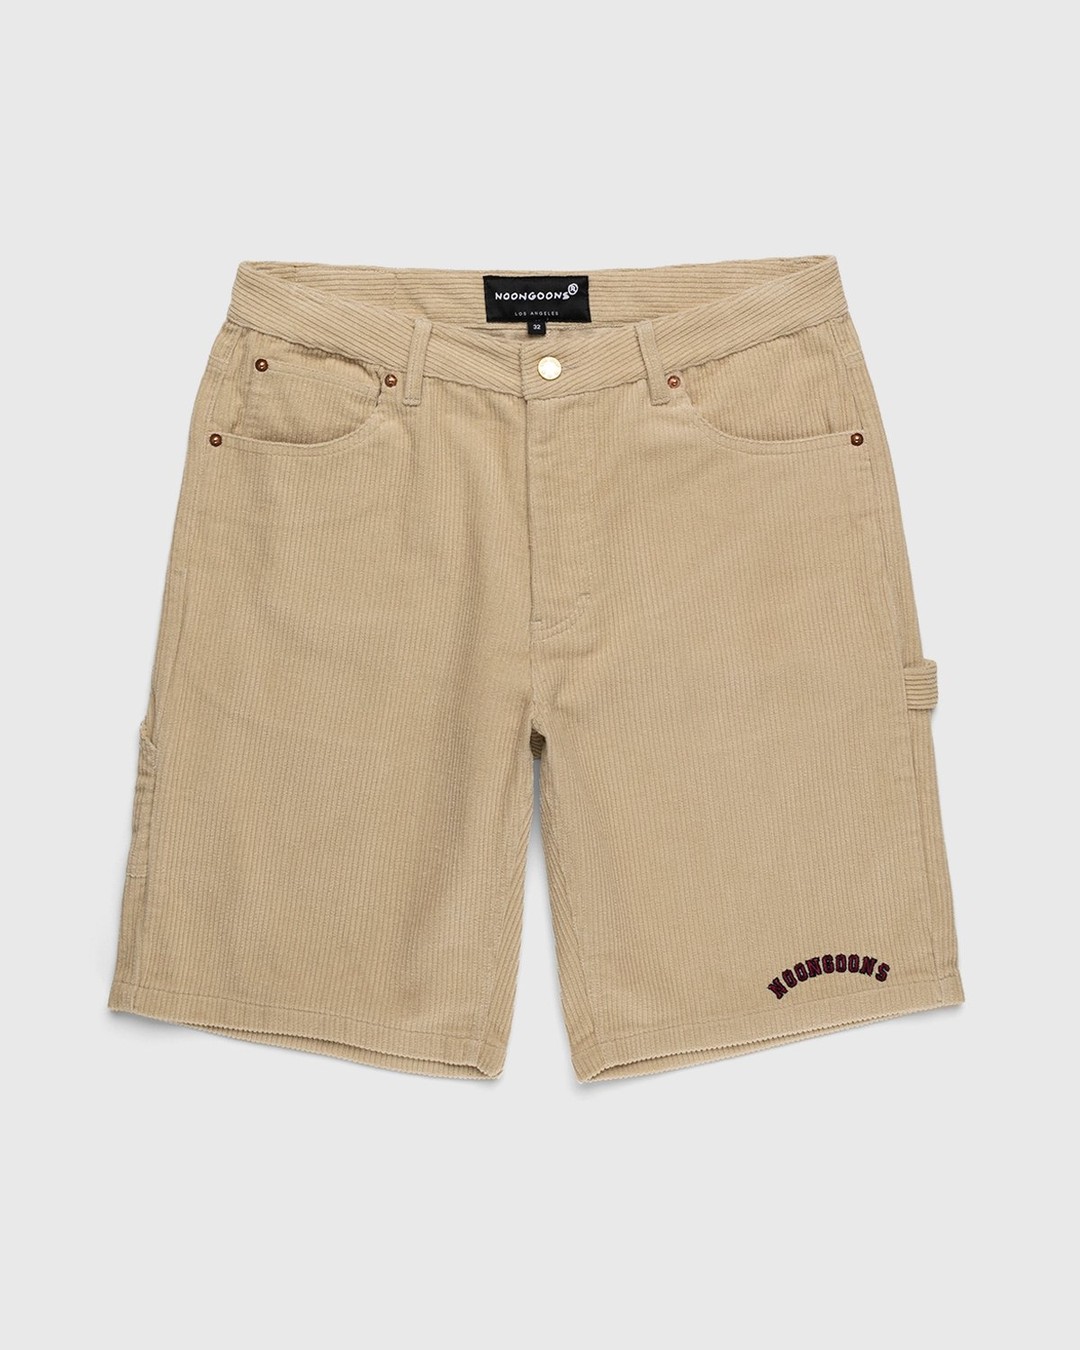 Noon Goons – Sublime Cord Short Overcast - Shorts - Beige - Image 1